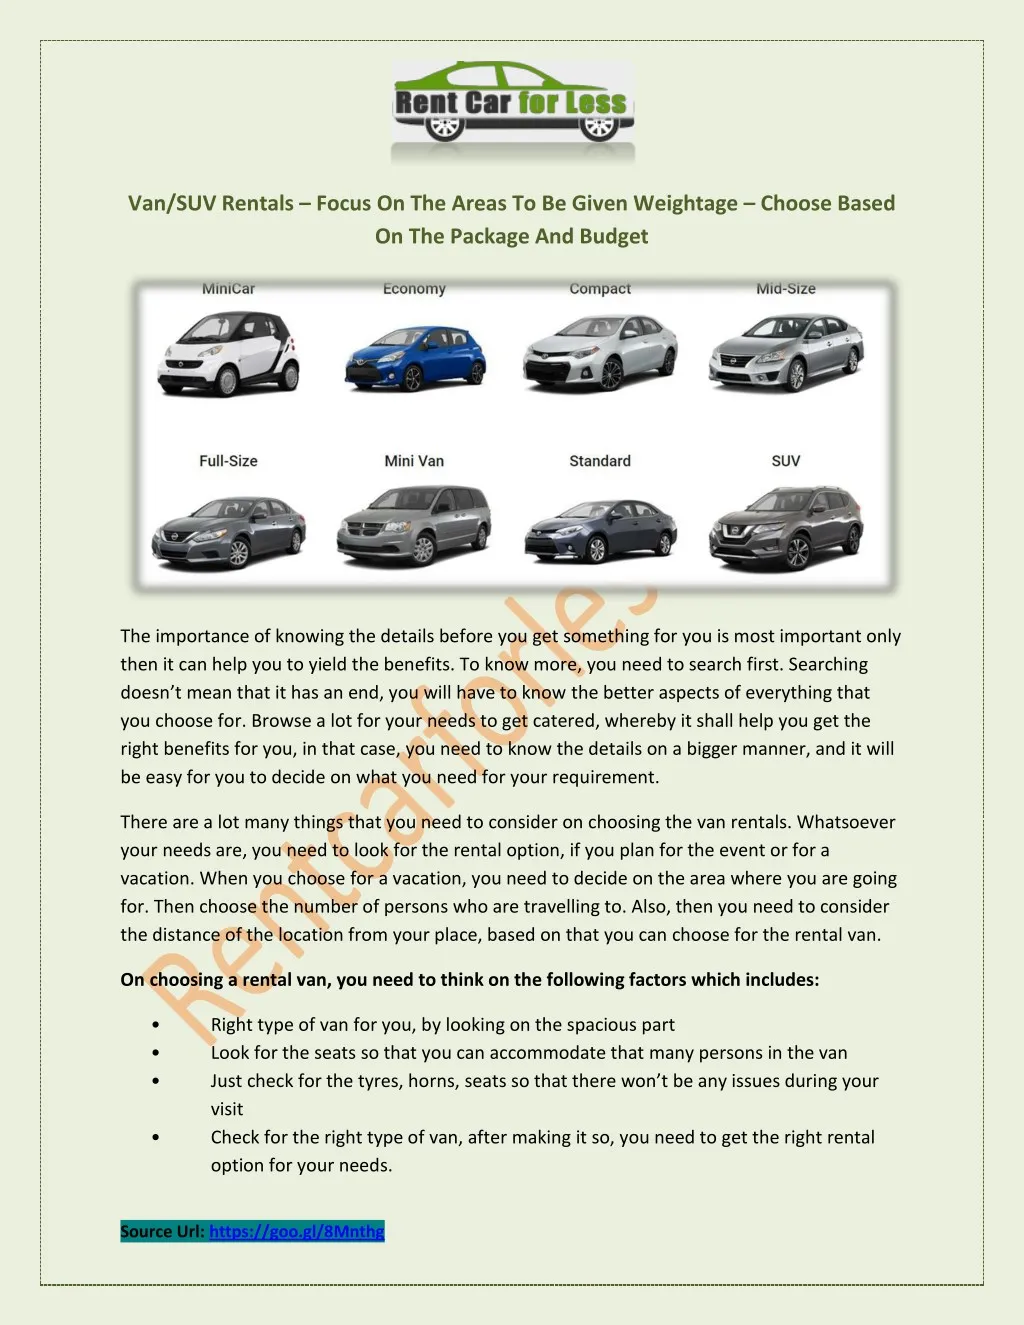 van suv rentals focus on the areas to be given